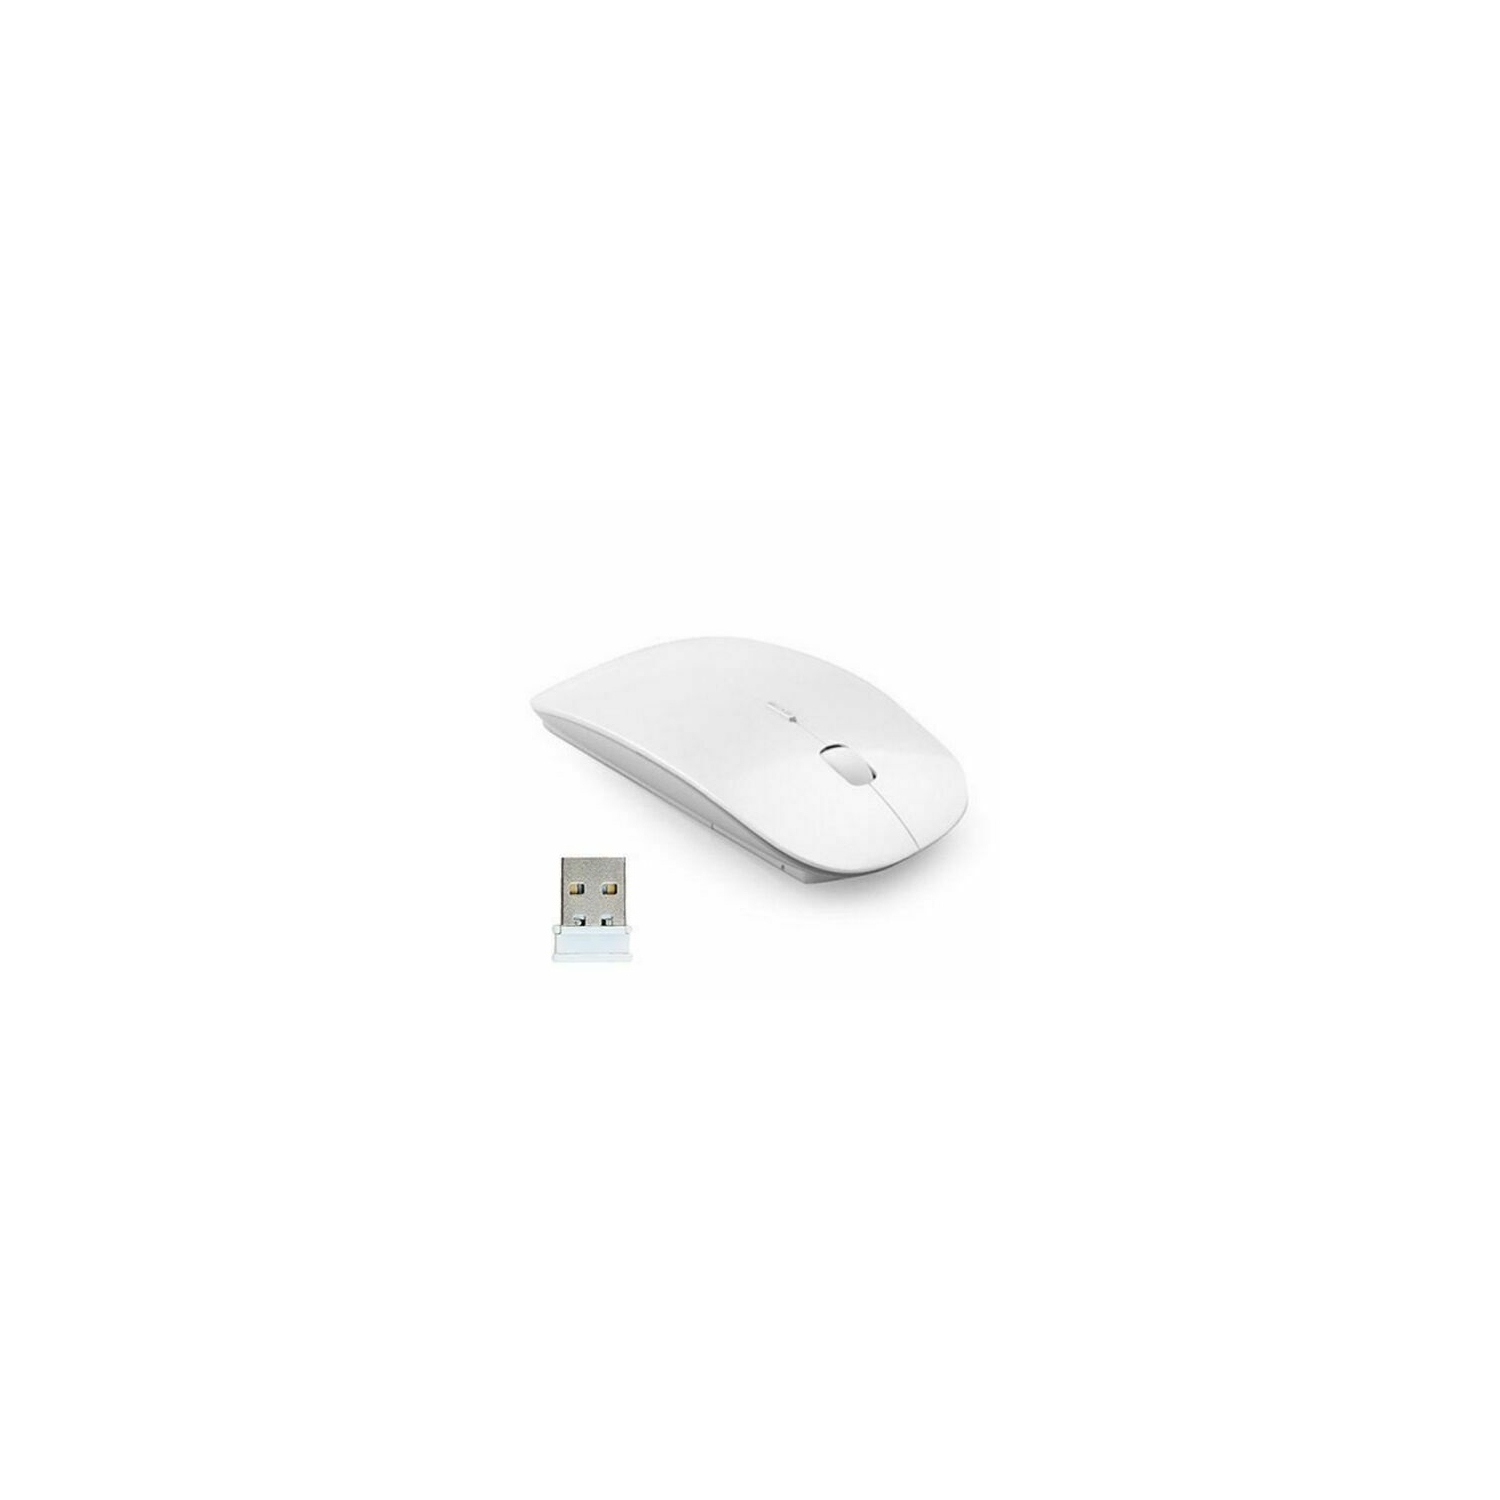 ISTAR 2.4ghz Wireless Mouse Ultra Slim USB 1600 DPI Optical Wireless Computer Mini Scroll Wireless Mouses for iPad MacBook Laptop Android Tablet Windows PC, White